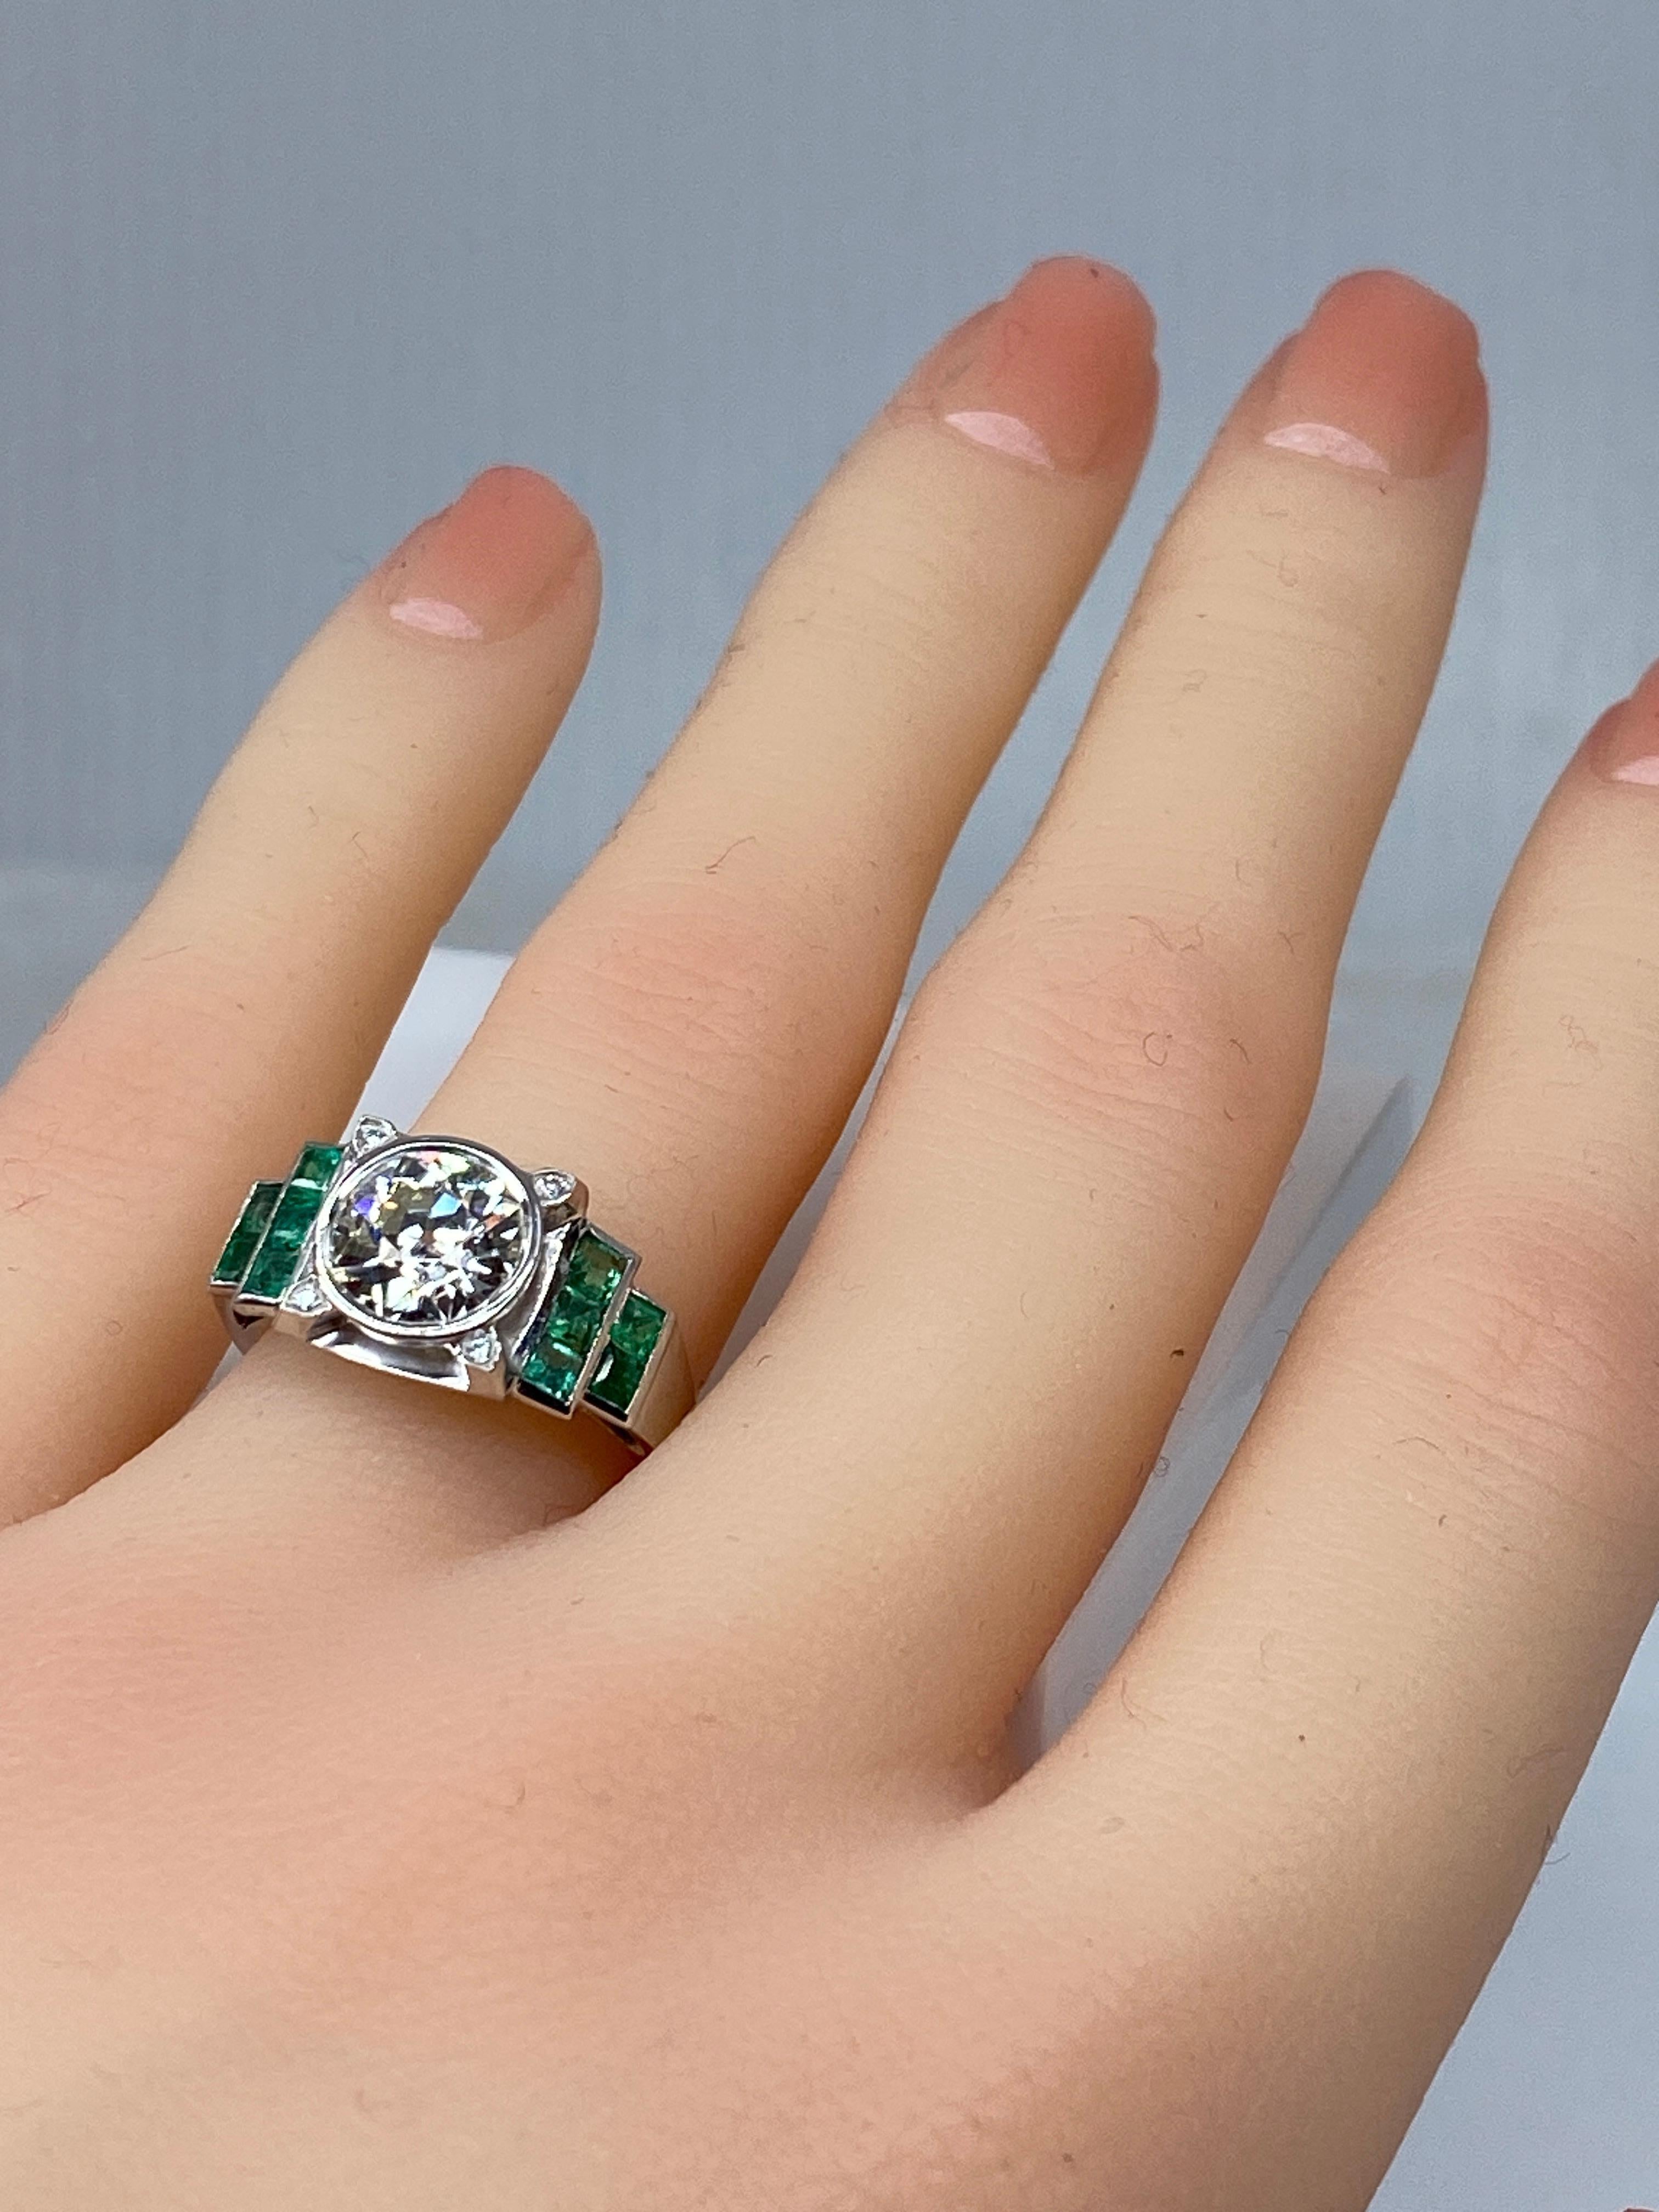 Platinium Engagement Ring Set with a 1.55 Carat Diamond Backed by Emeralds, 1900 For Sale 2